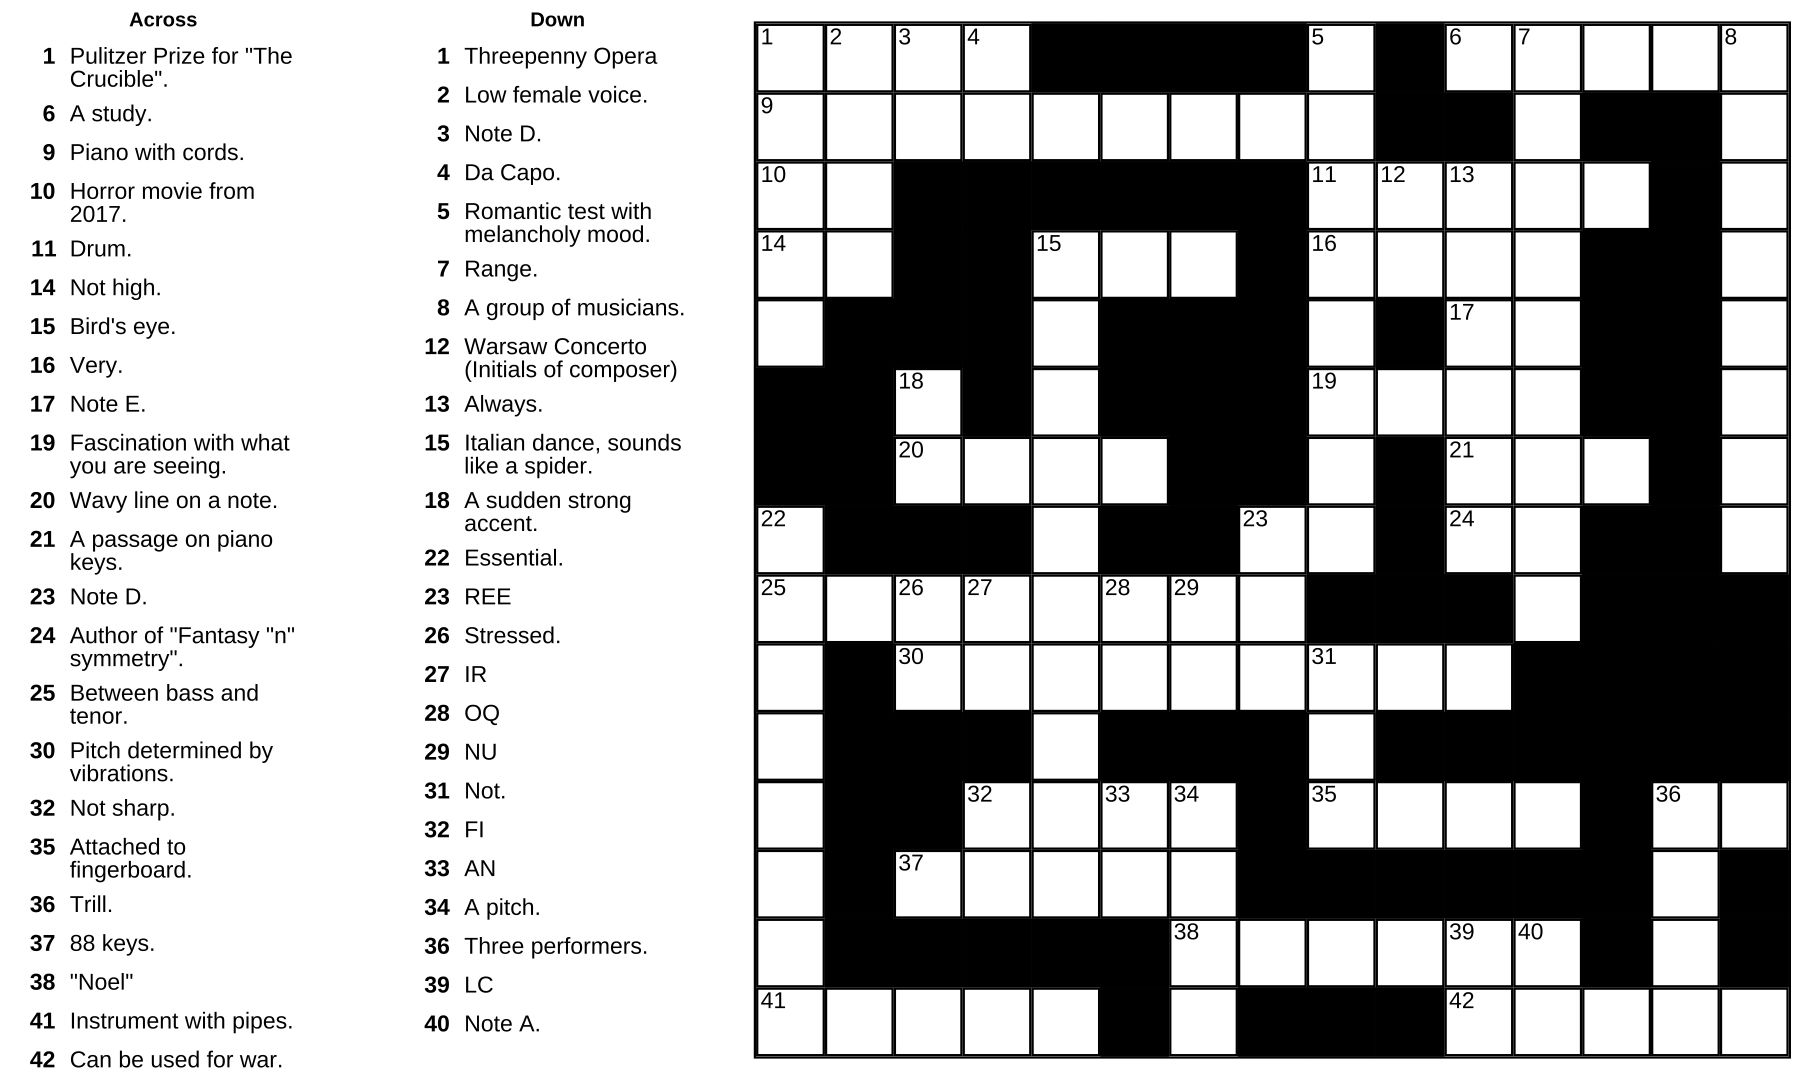 Free crossword puzzles download how to download epic games